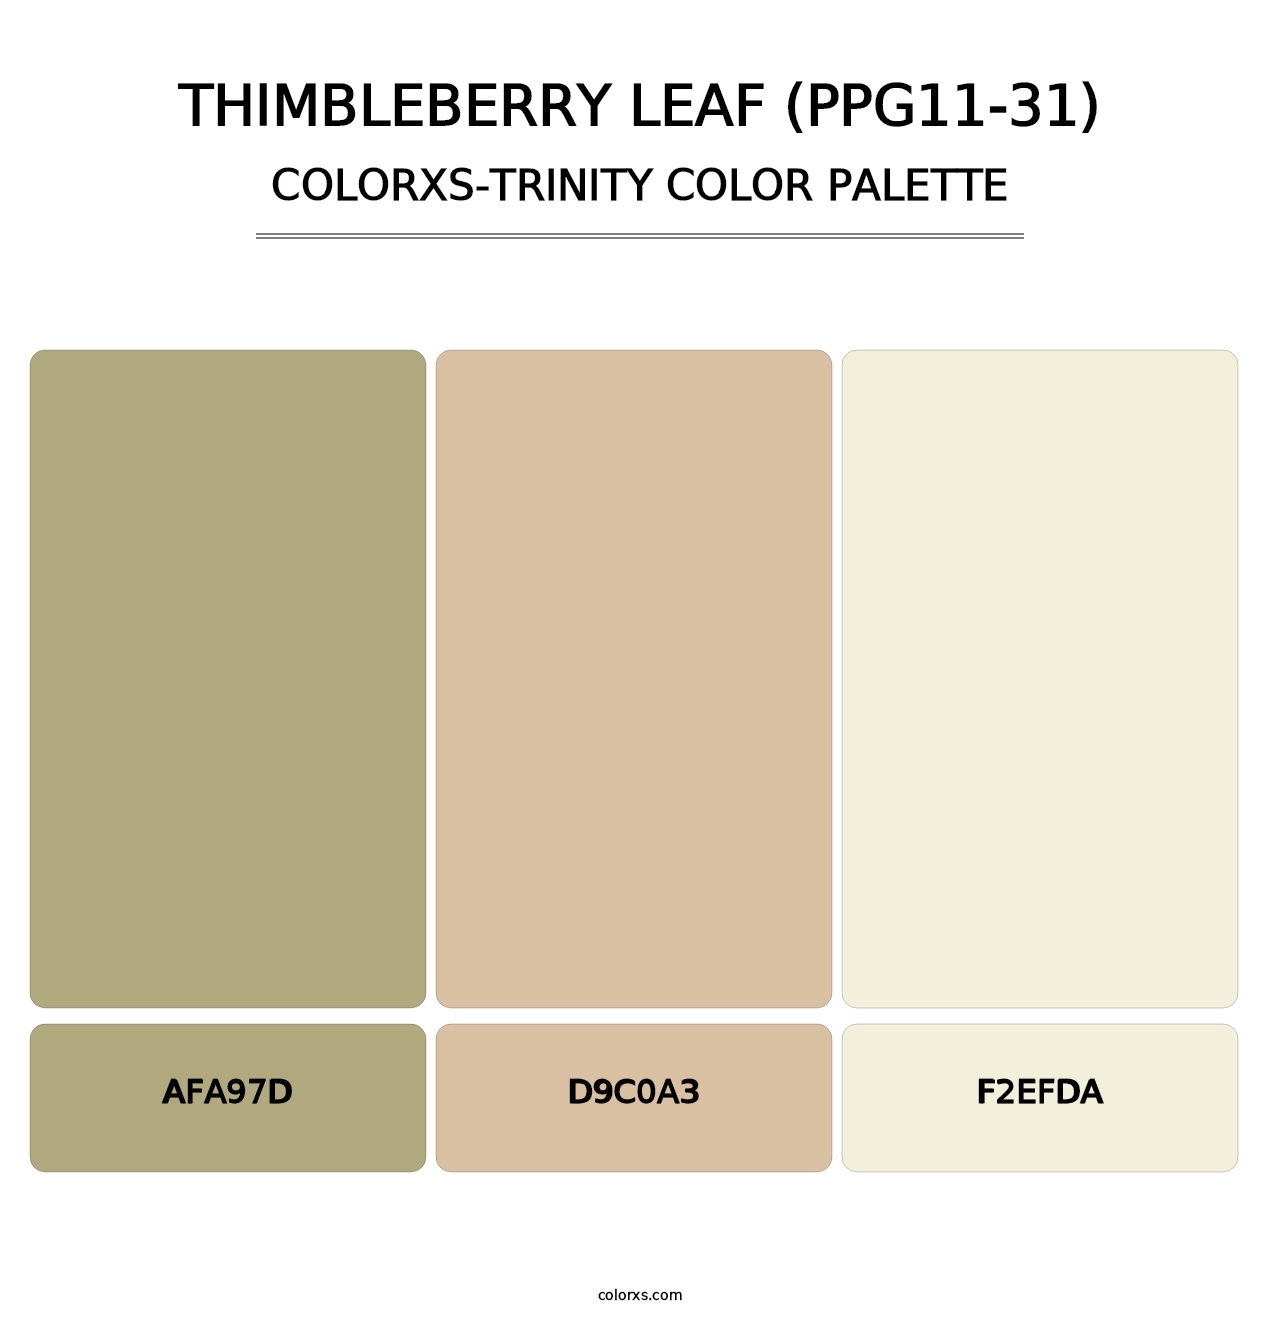 Thimbleberry Leaf (PPG11-31) - Colorxs Trinity Palette